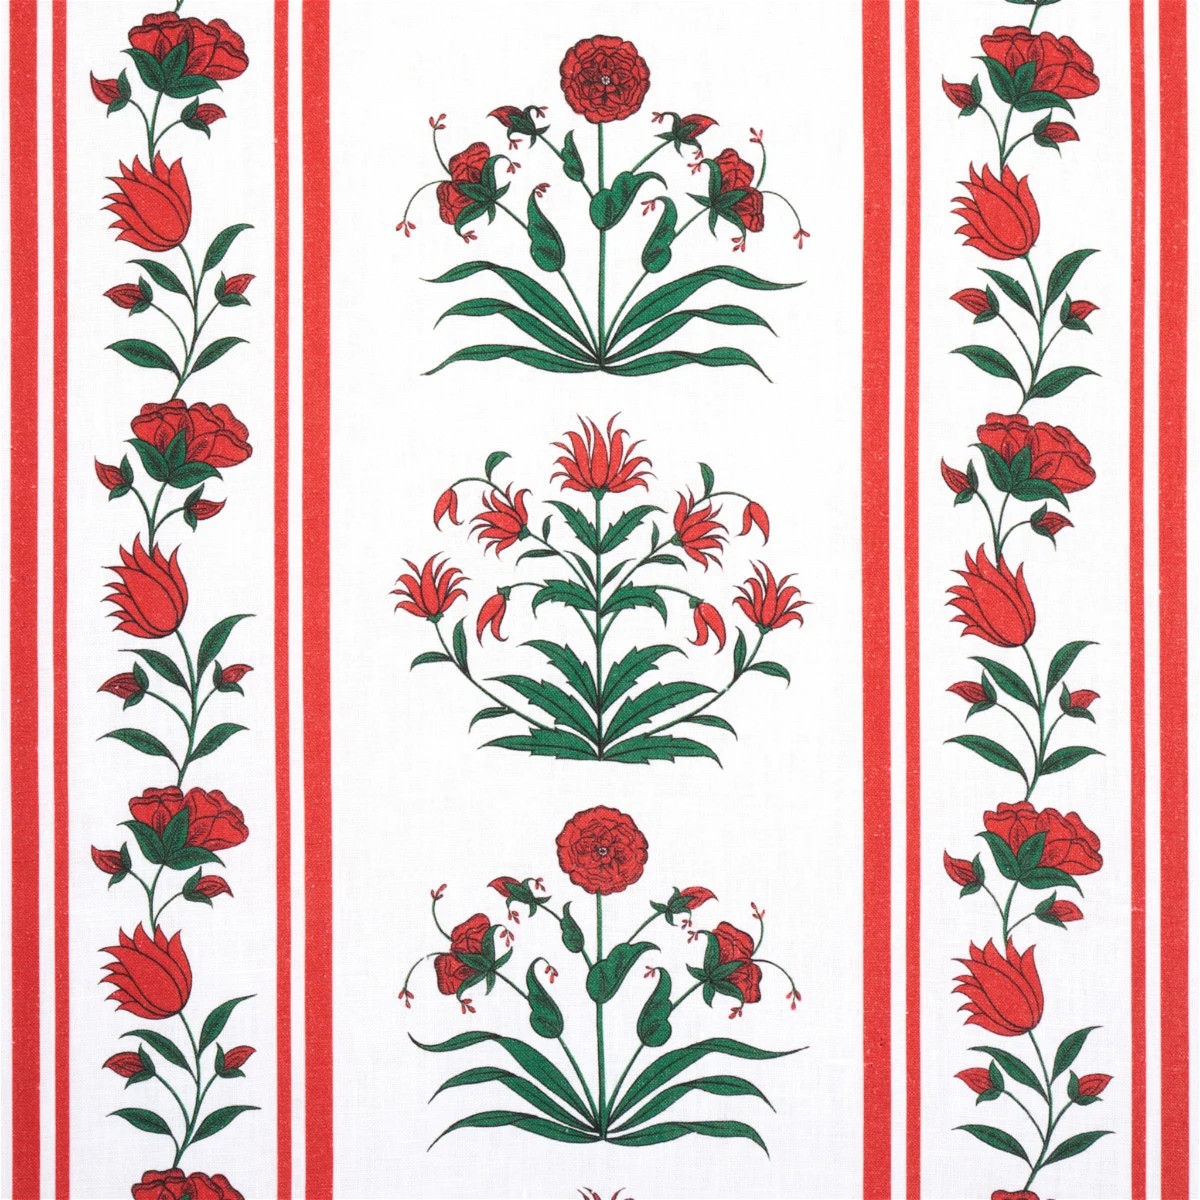 The image of an Royal Poppy Fabric product